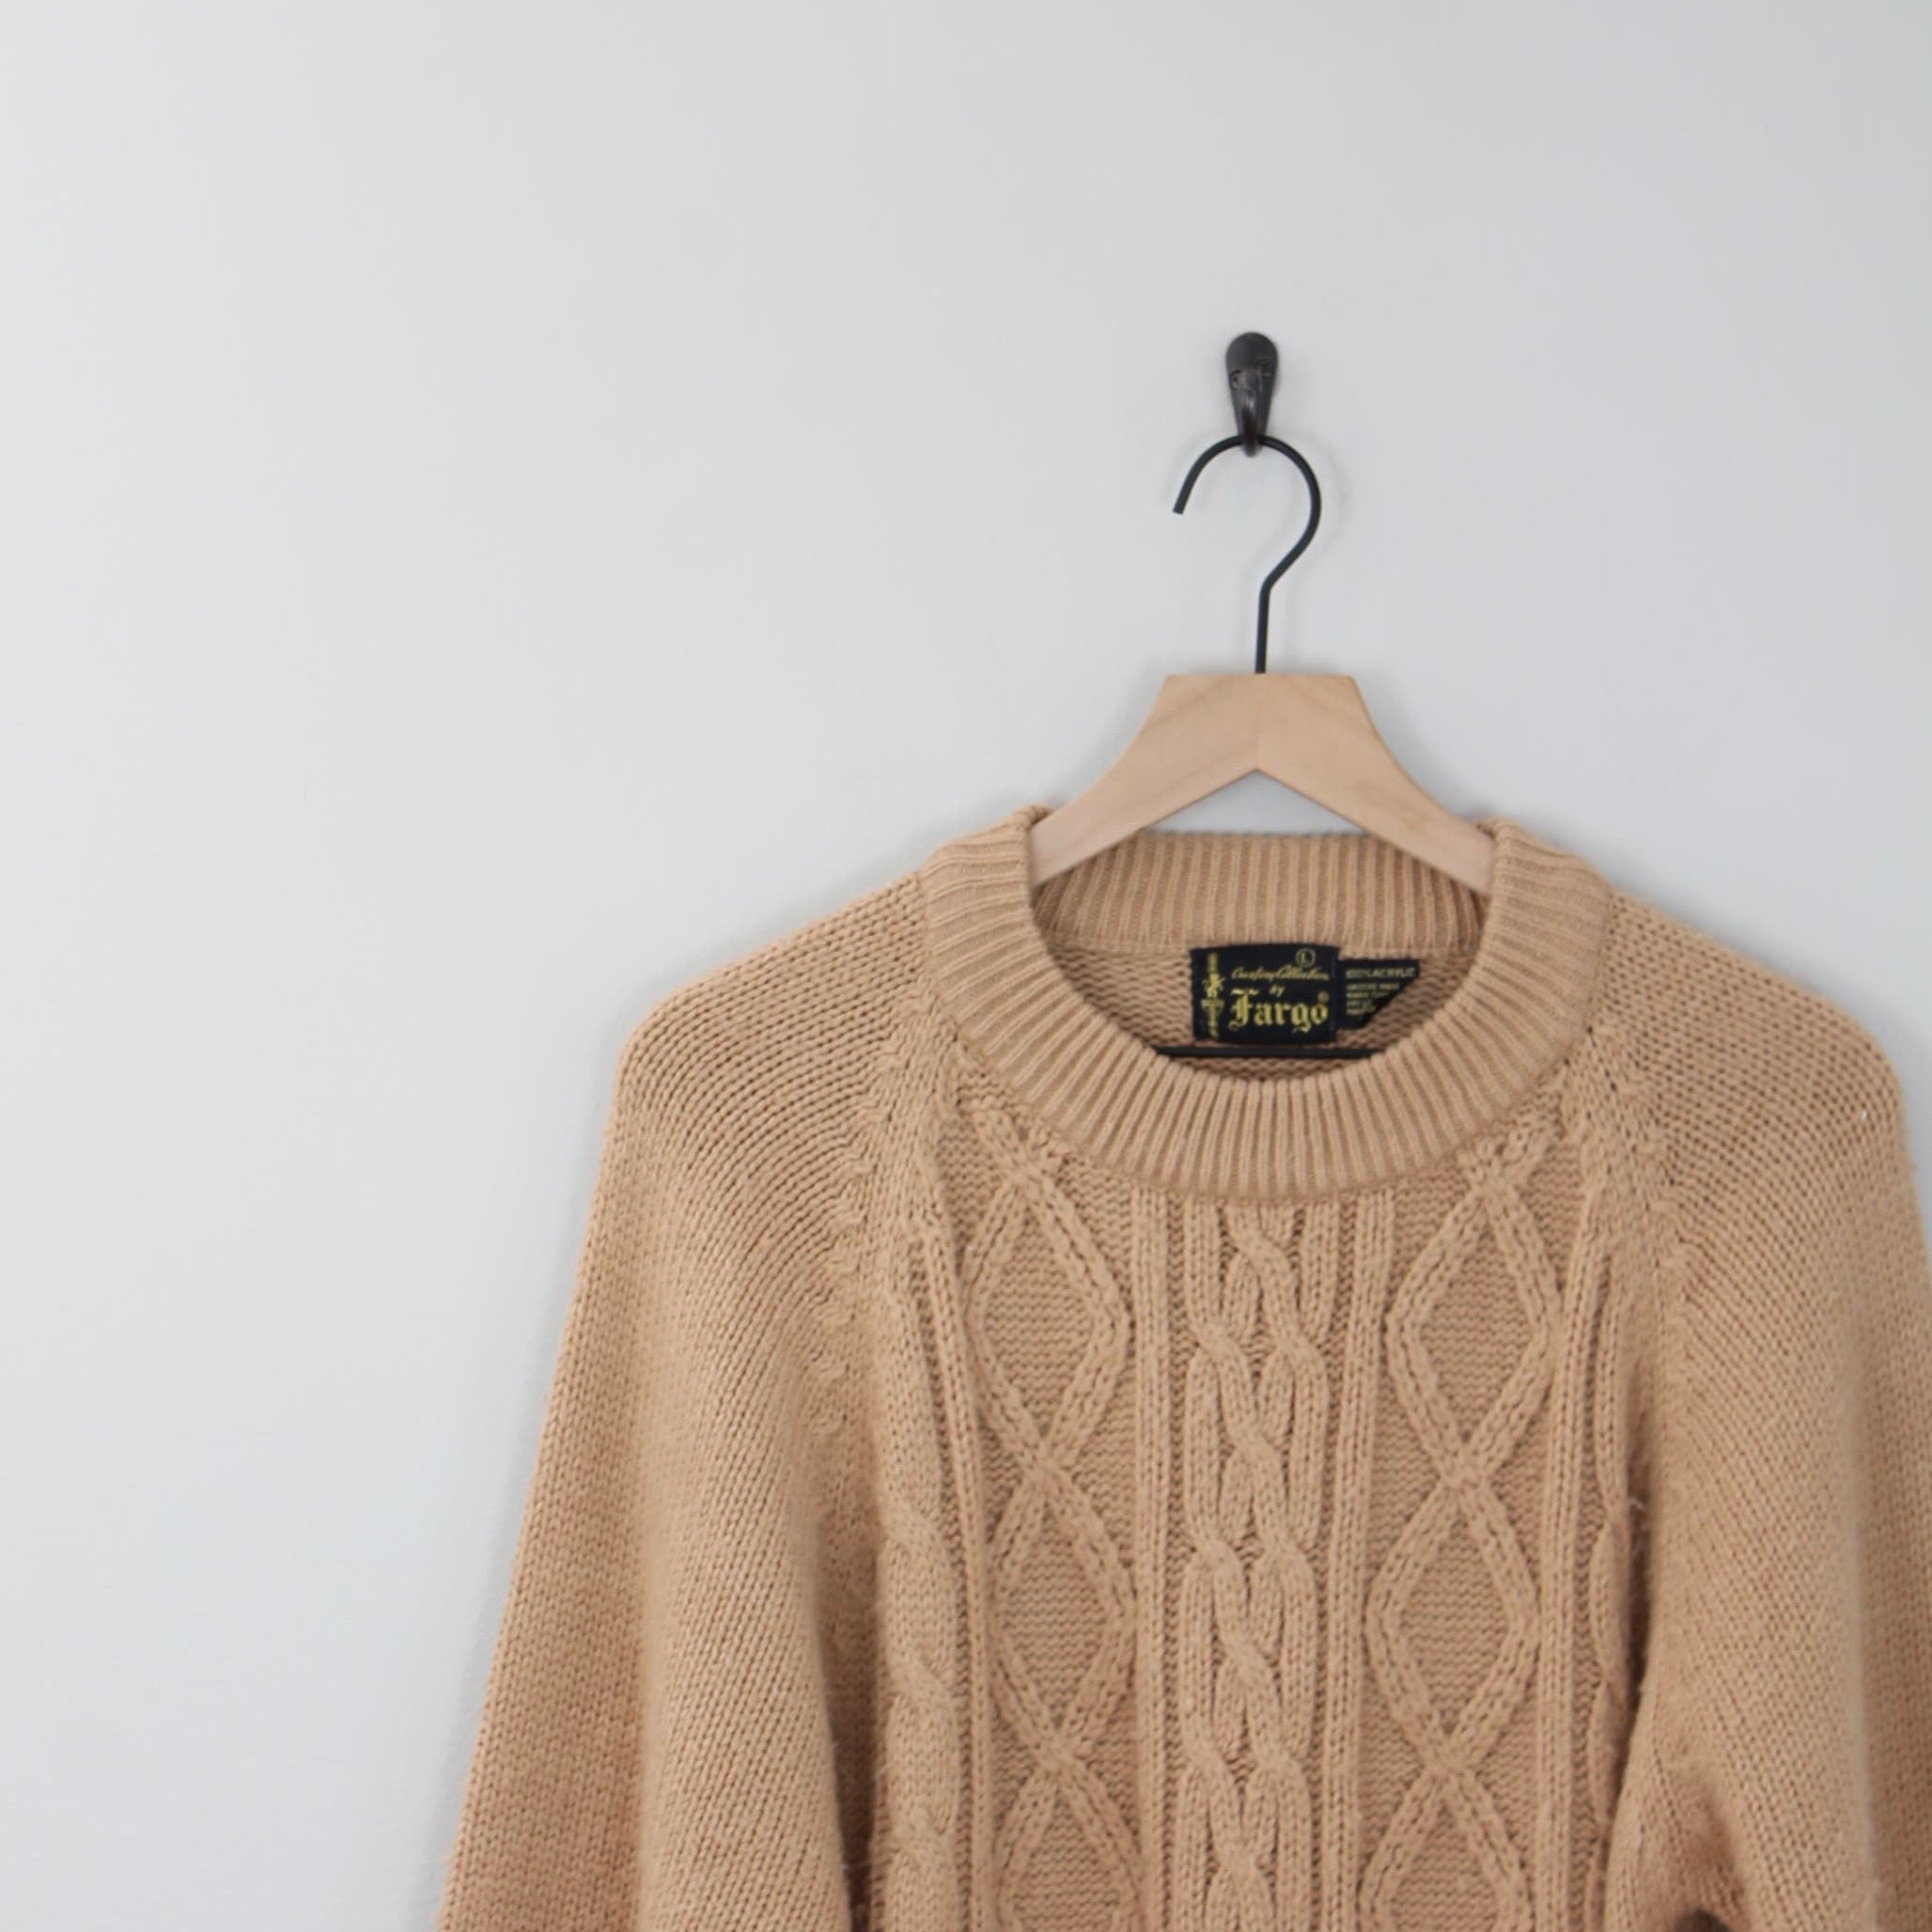 Vintage 70s Brown Cable Knit, Fishermans Sweater, Size Large